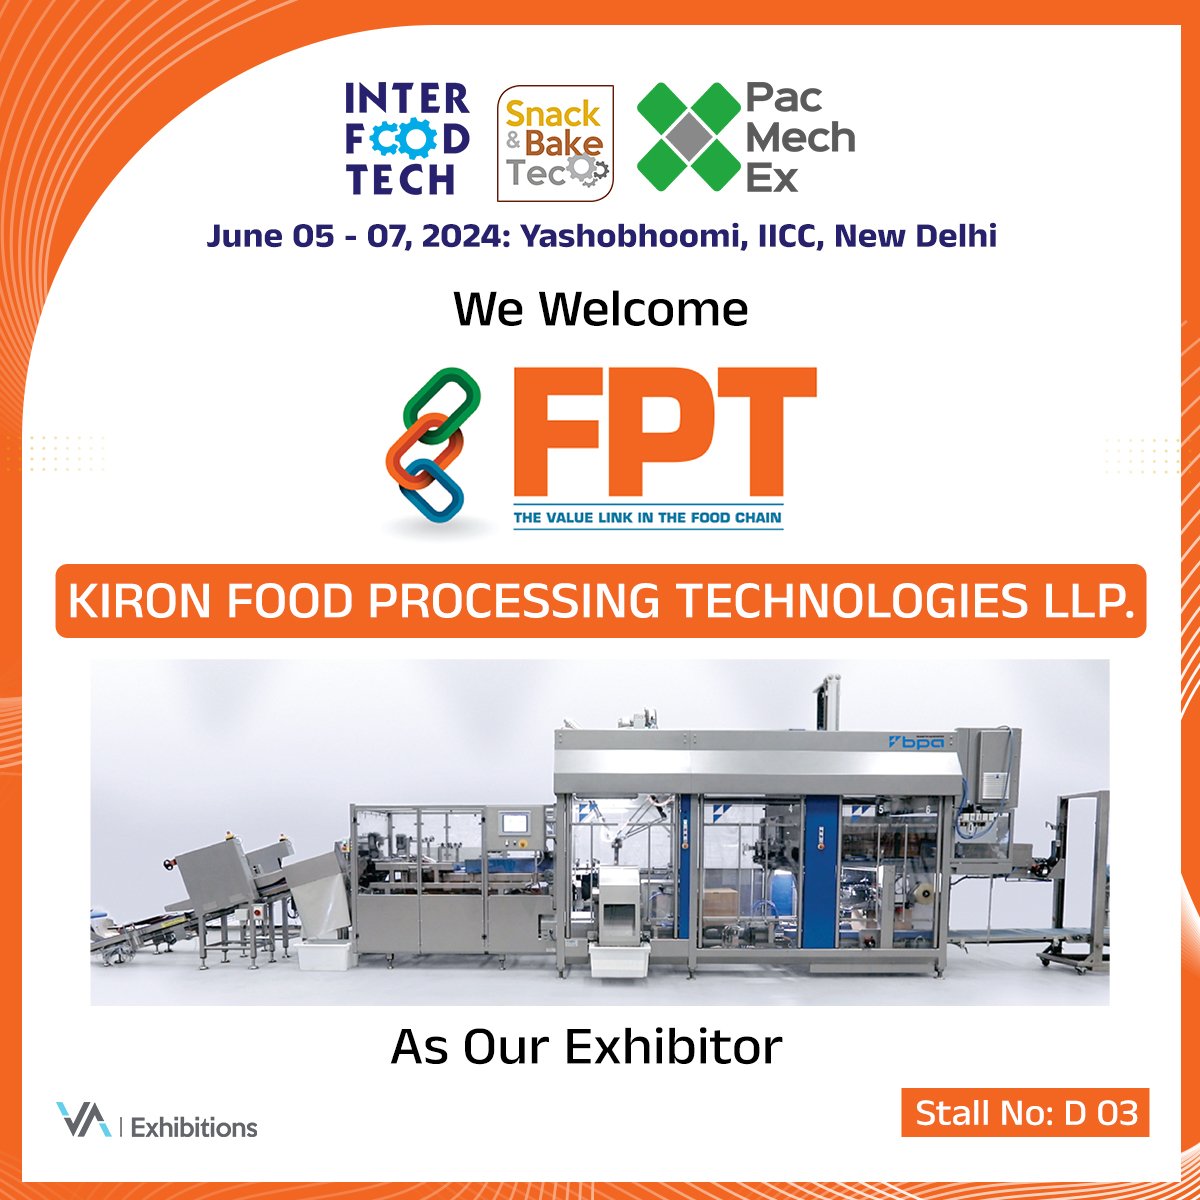 We are excited to present KIRON FOOD PROCESSING TECHNOLOGIES LLP as our valued Exhibitor.

#KironFoodTech #FoodProcessingInnovation #EngineeringExcellence #FoodTechExpo #SustainableManufacturing #InterFoodTech2024